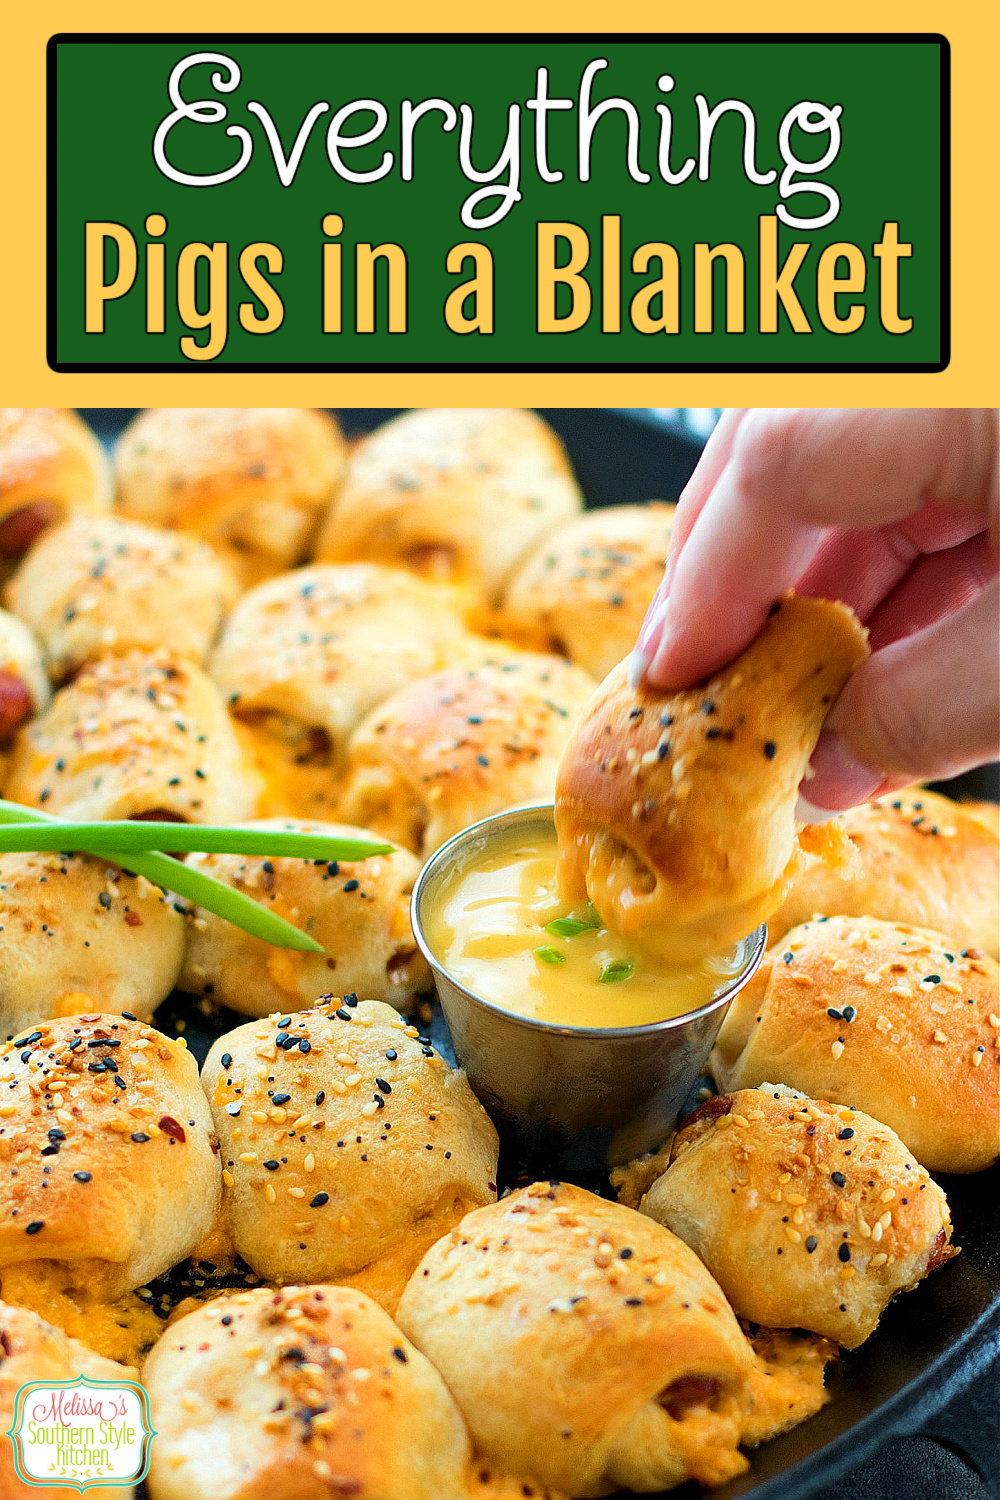 Take this classic snack to another level with Everything bagel seasoning ~ Everything Pigs in a Blanket #pigsinablanket #minicrescentdogs #hotdogs #appetizers #snacks #lilsmokies #smokedsausages #partyfood #easyrecipes #superbowlfood #appetizers #tailgating #graduationparty #food #recipes #southernrecipes #southernfood #melissassouthernstylekitchen via @melissasssk